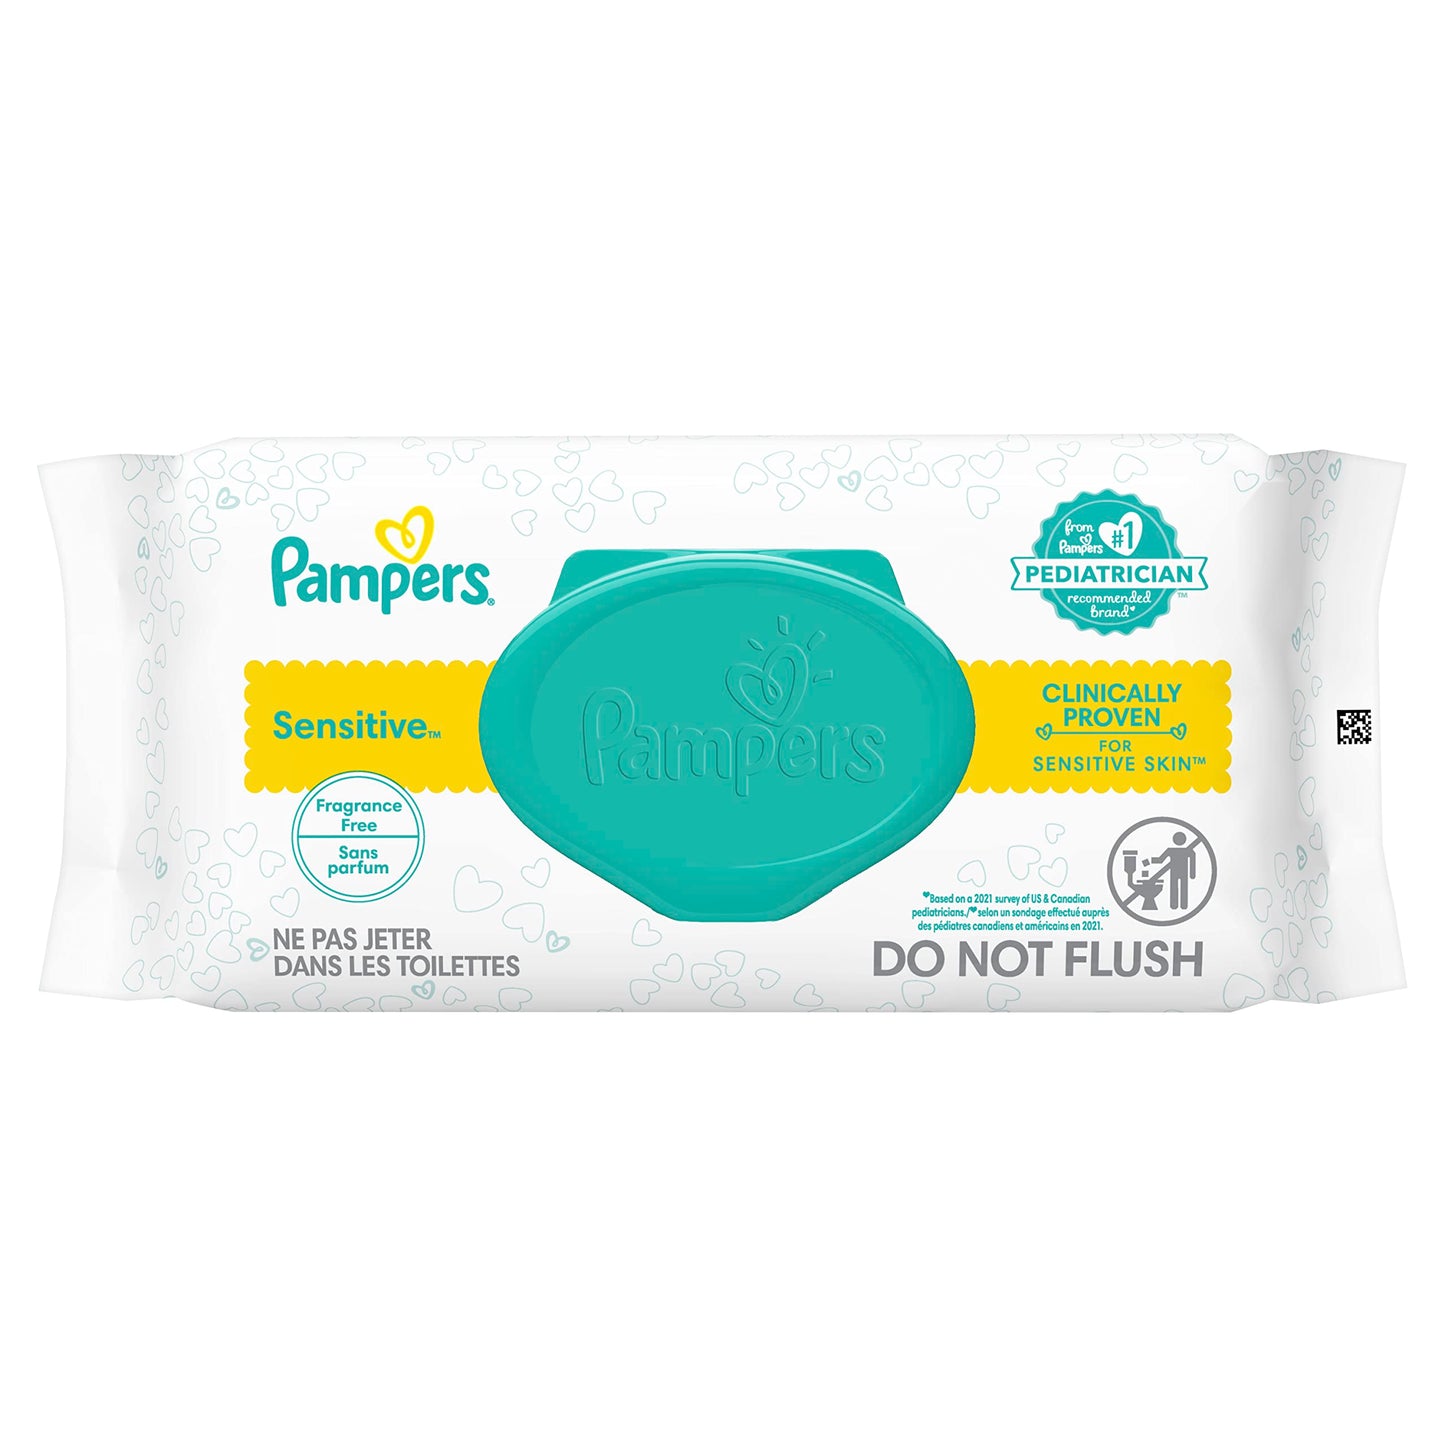 Pampers Sensitive Baby Wipes - 56 Count, Water Based, Hypoallergenic and Unscented (Packaging May Vary)